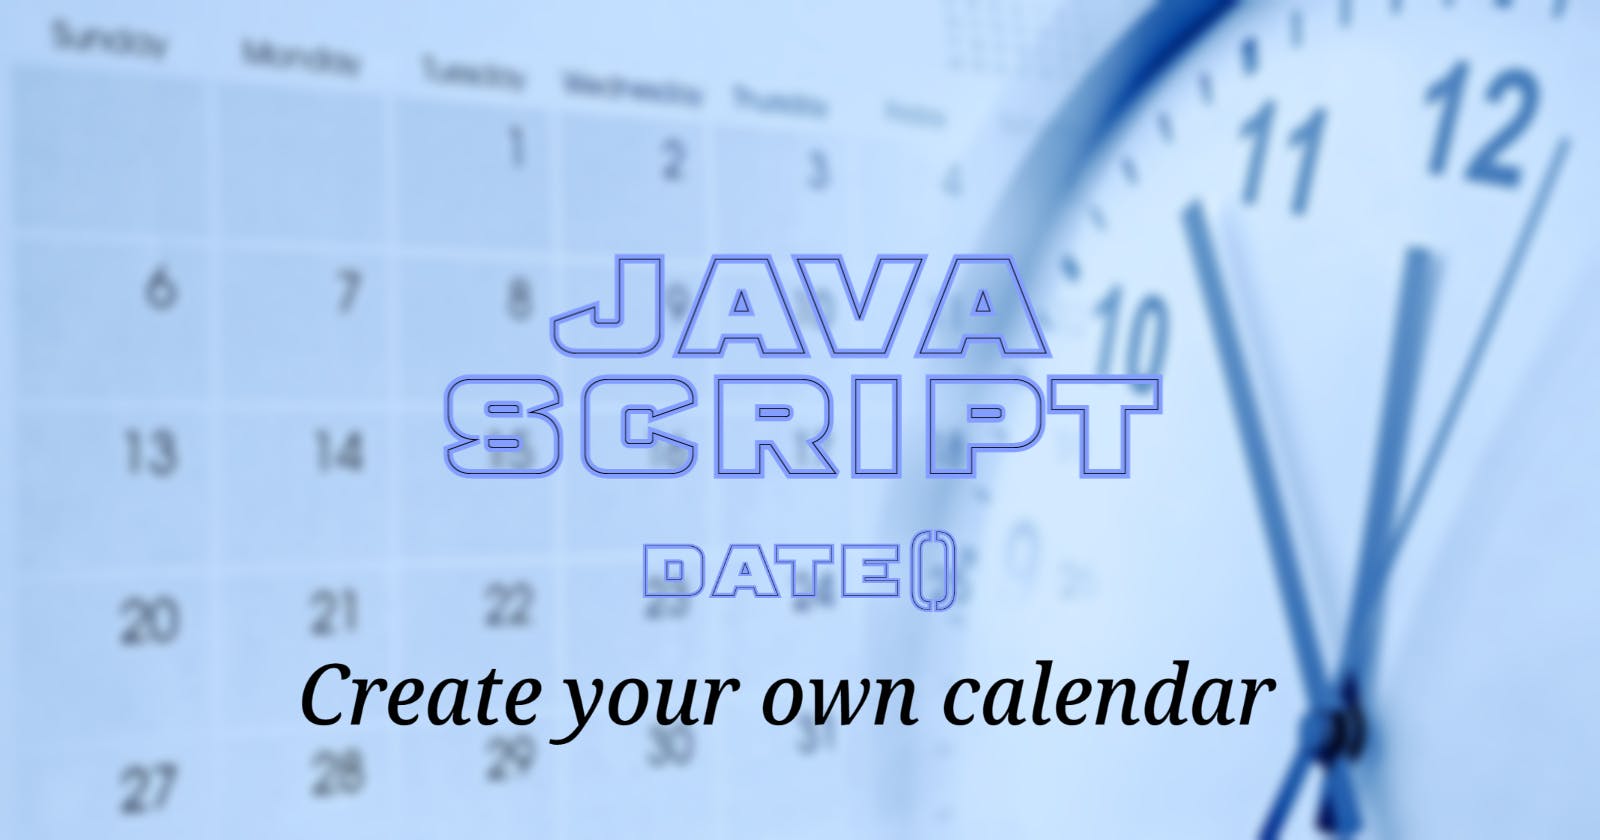 Date () of object  in JavaScript